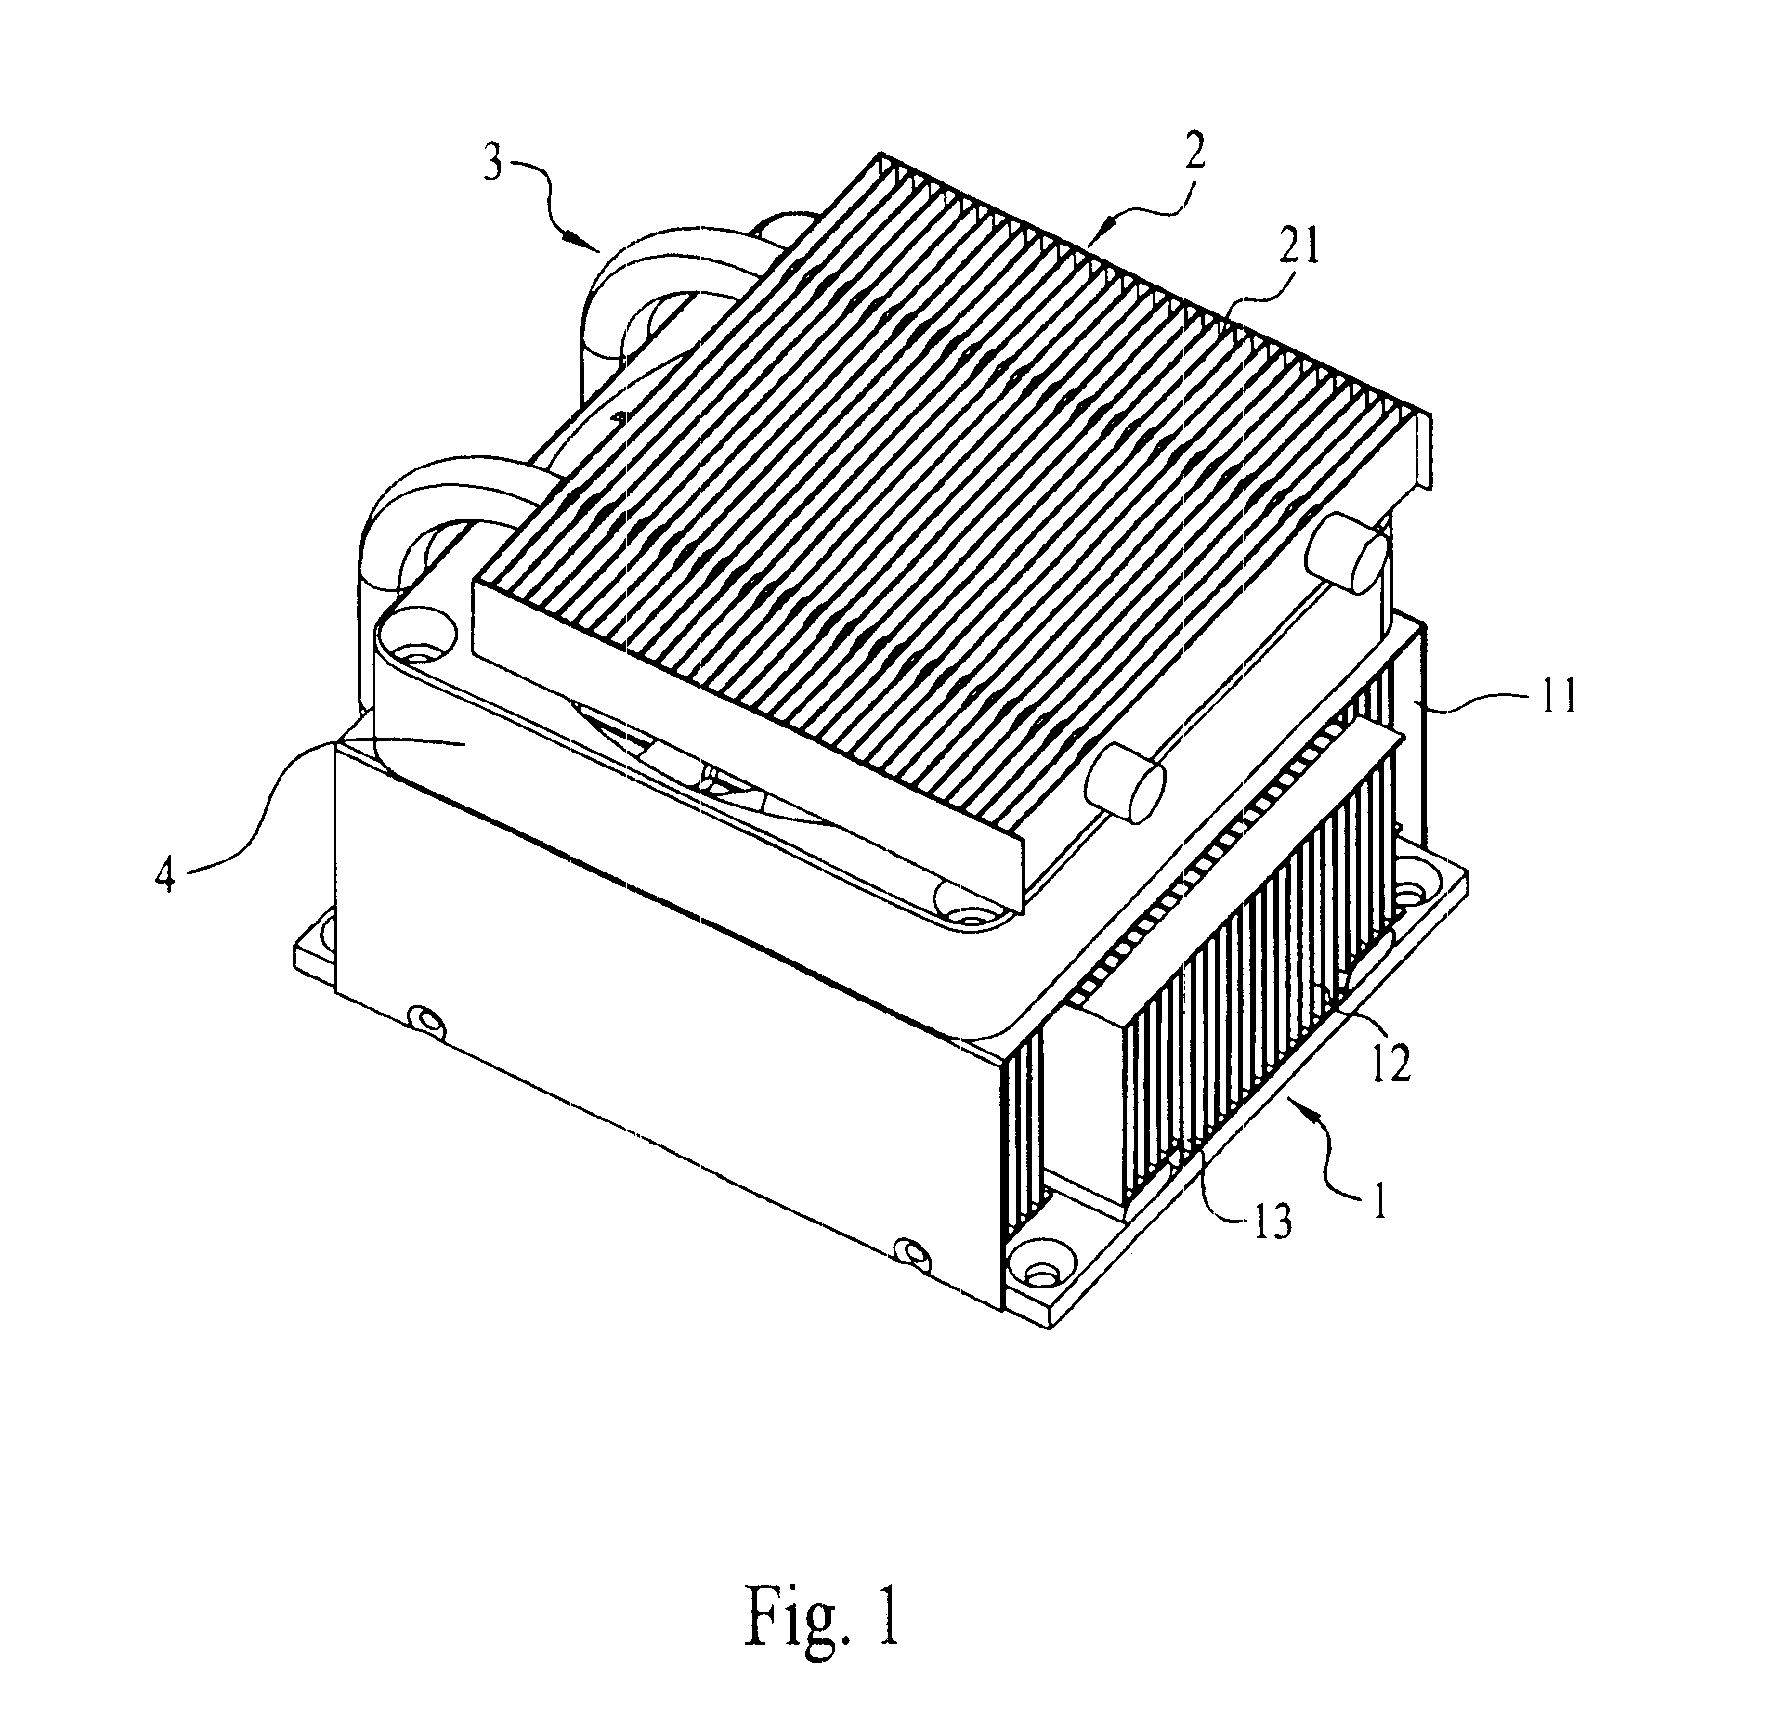 Heat sink assembly with heat pipe